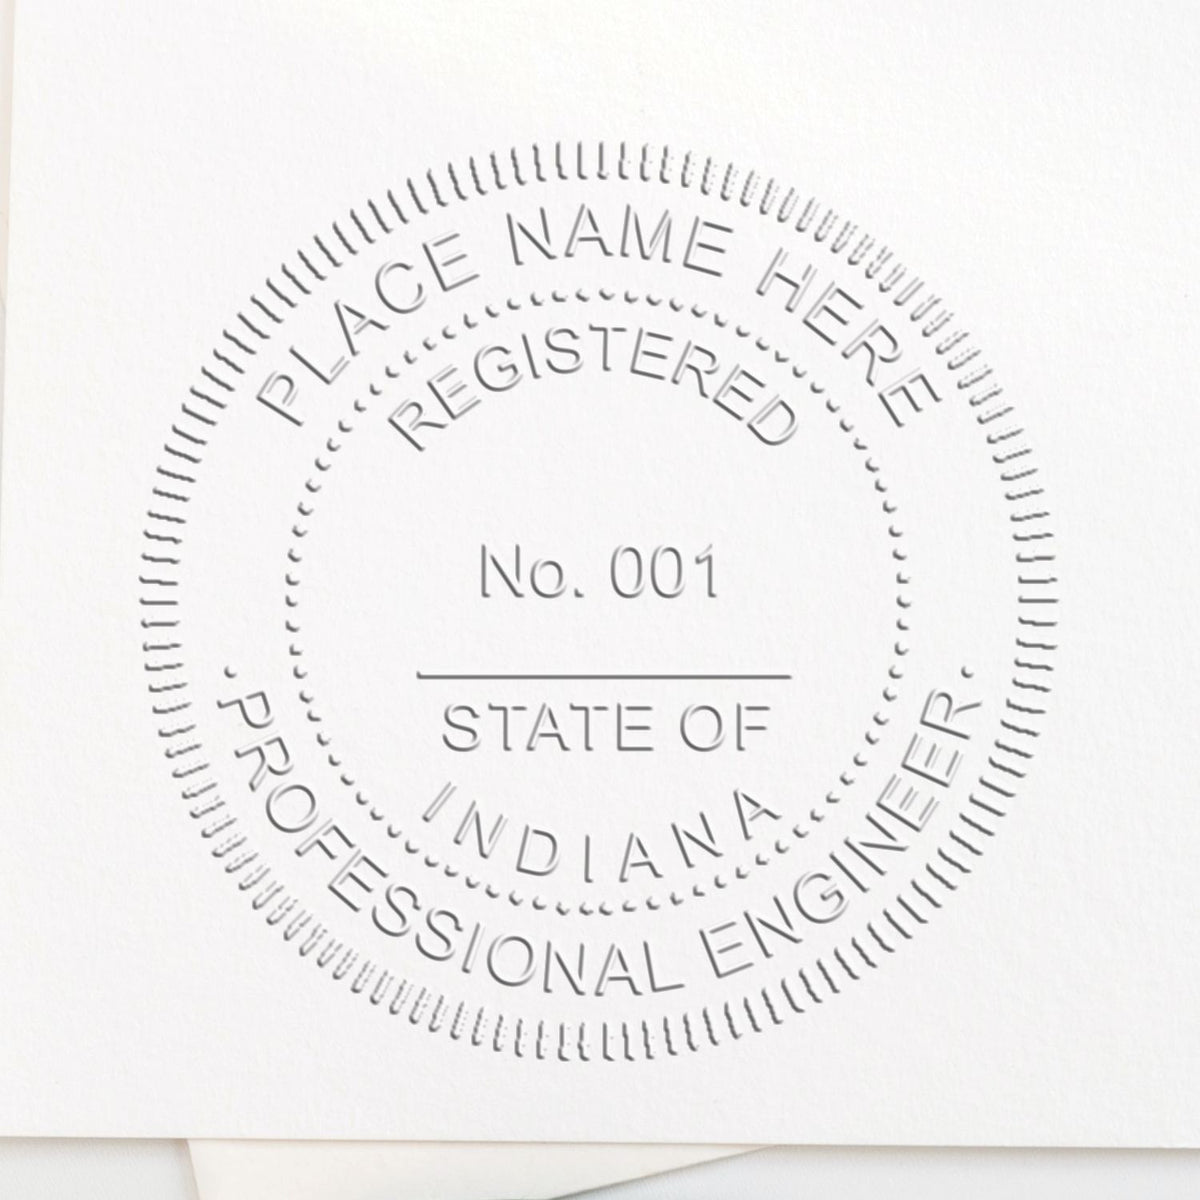 An in use photo of the Hybrid Indiana Engineer Seal showing a sample imprint on a cardstock